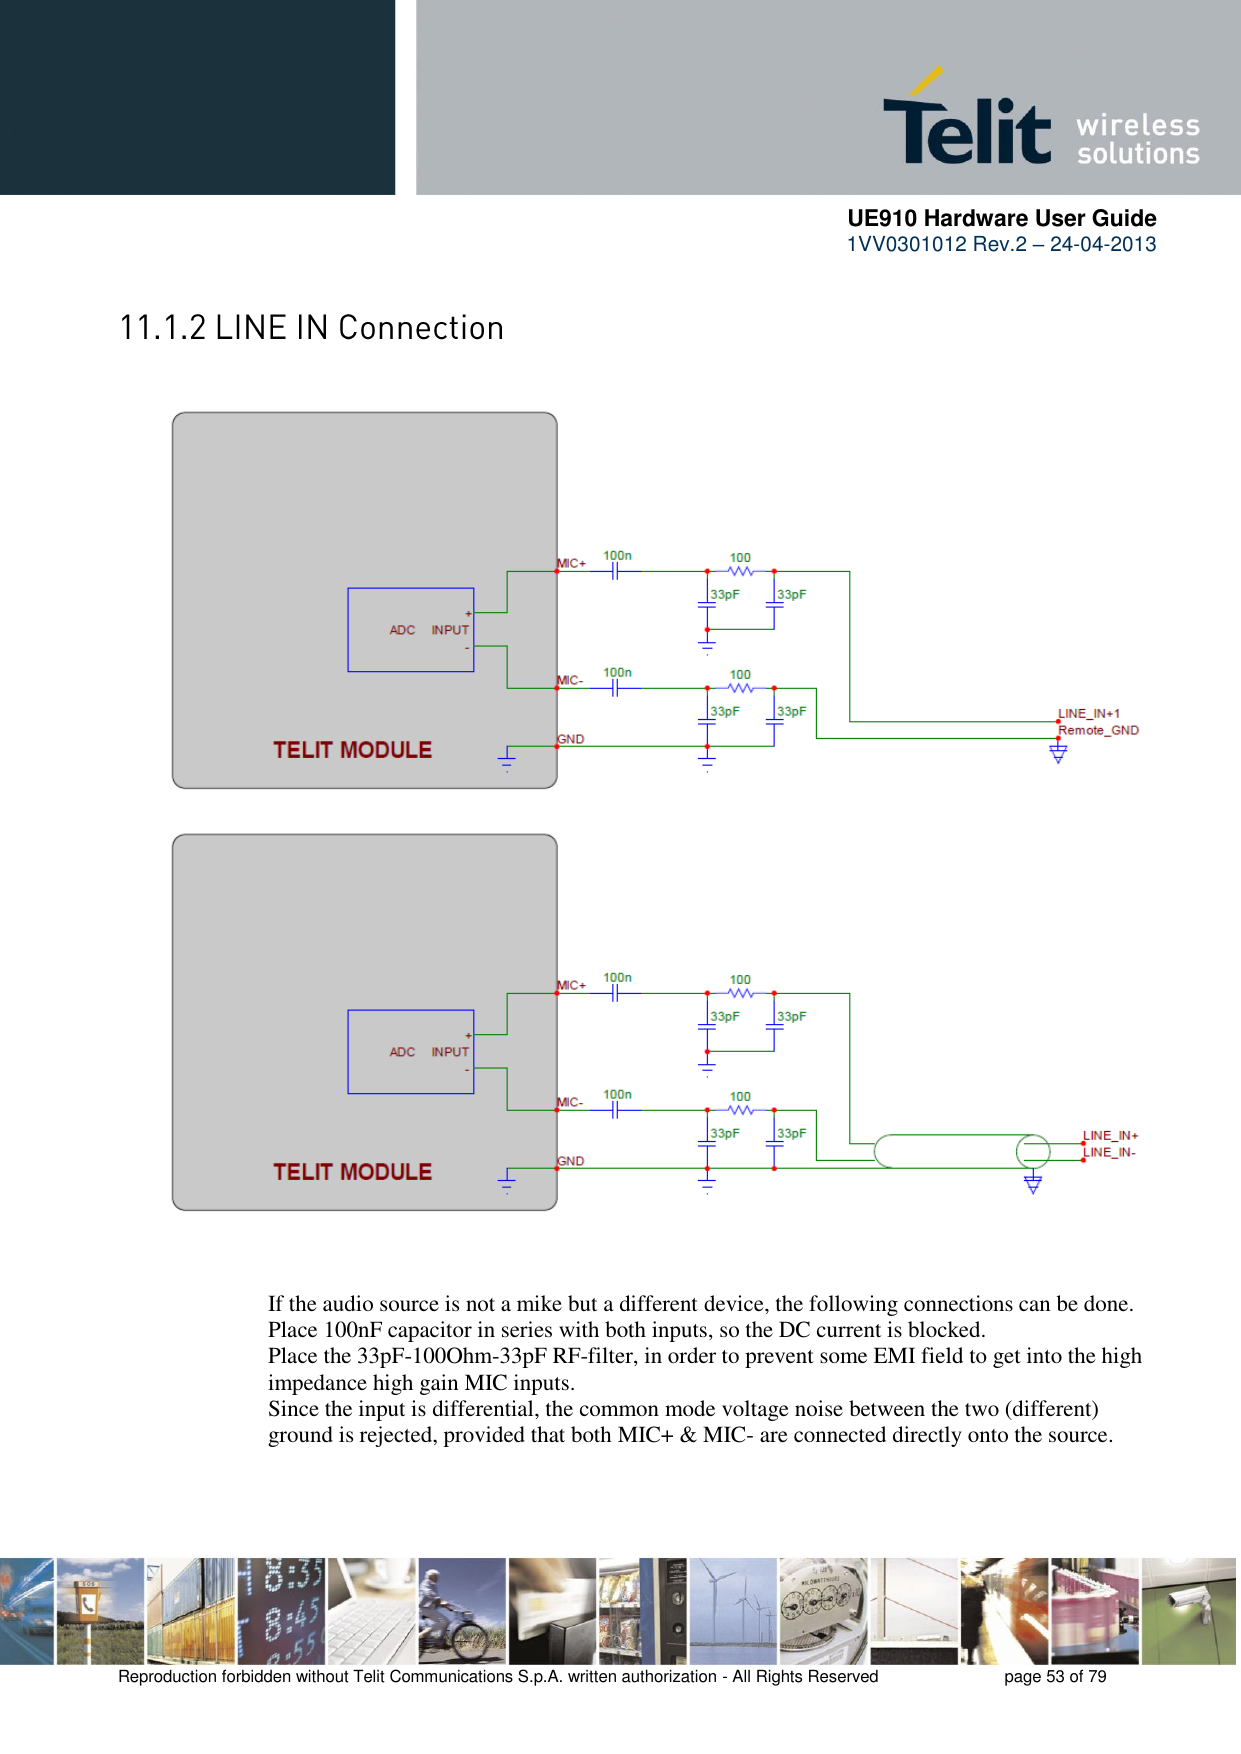      UE910 Hardware User Guide  1VV0301012 Rev.2 – 24-04-2013    Reproduction forbidden without Telit Communications S.p.A. written authorization - All Rights Reserved    page 53 of 79     If the audio source is not a mike but a different device, the following connections can be done. Place 100nF capacitor in series with both inputs, so the DC current is blocked. Place the 33pF-100Ohm-33pF RF-filter, in order to prevent some EMI field to get into the high impedance high gain MIC inputs. Since the input is differential, the common mode voltage noise between the two (different) ground is rejected, provided that both MIC+ &amp; MIC- are connected directly onto the source.    